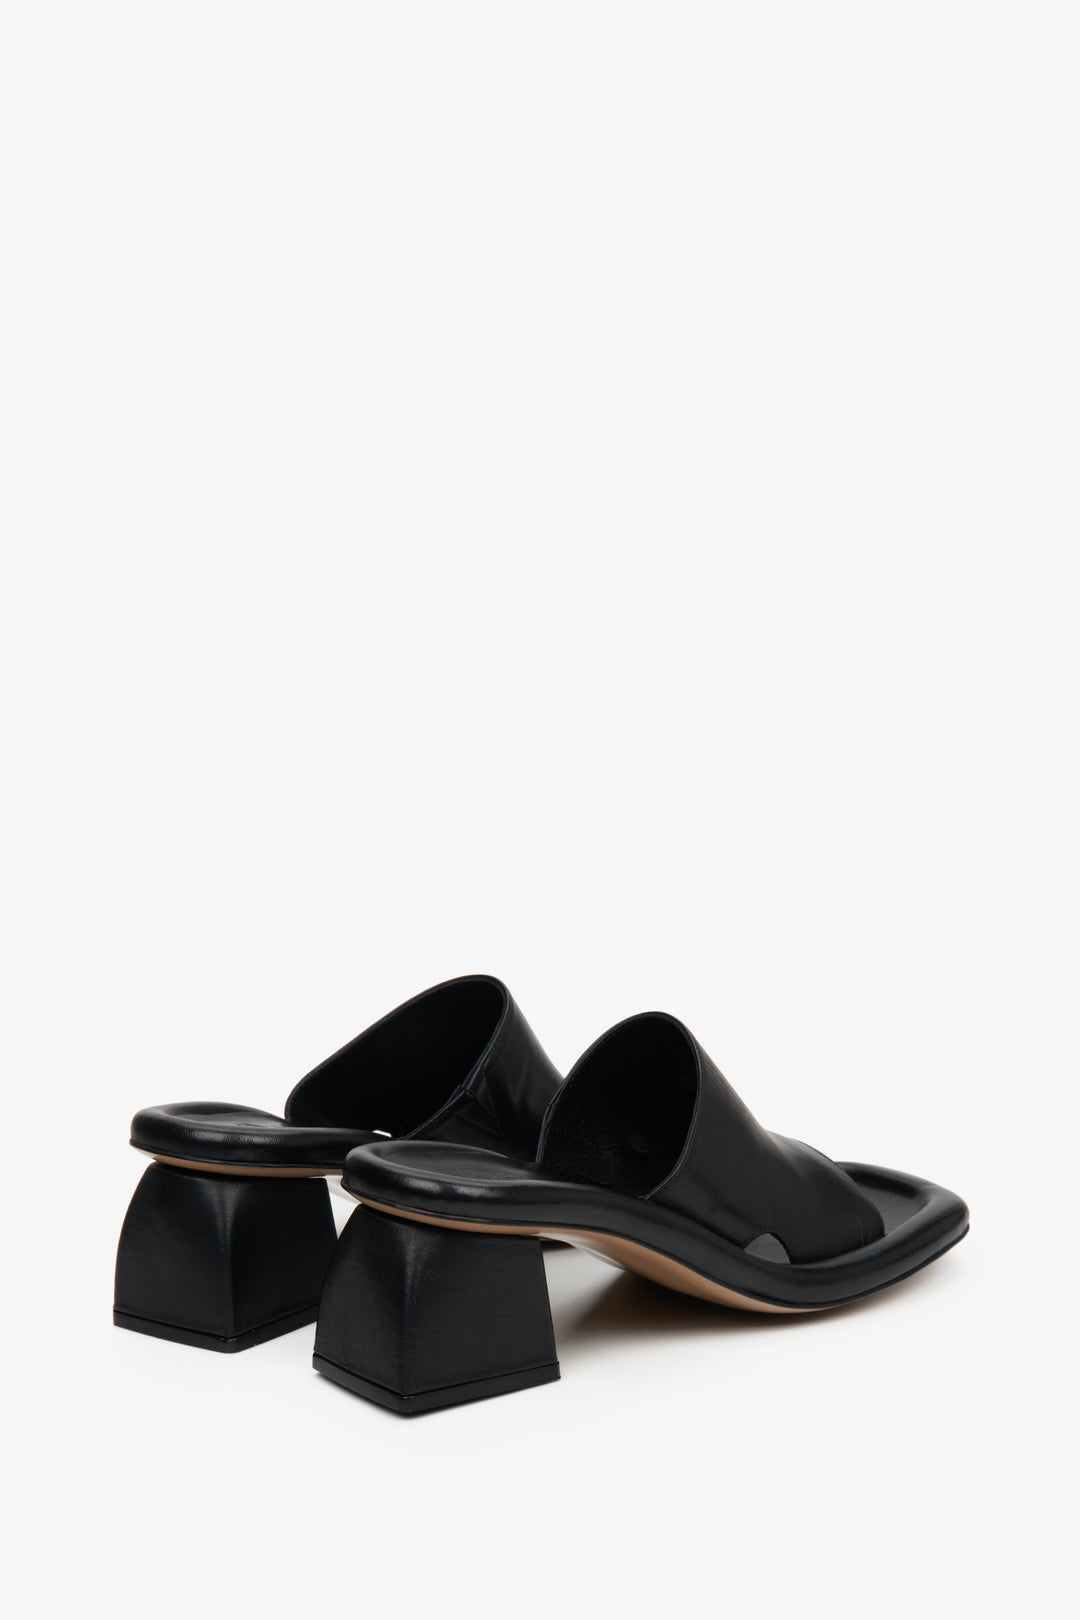 Women's black mules with a square heel - a close-up of the back of the shoes.